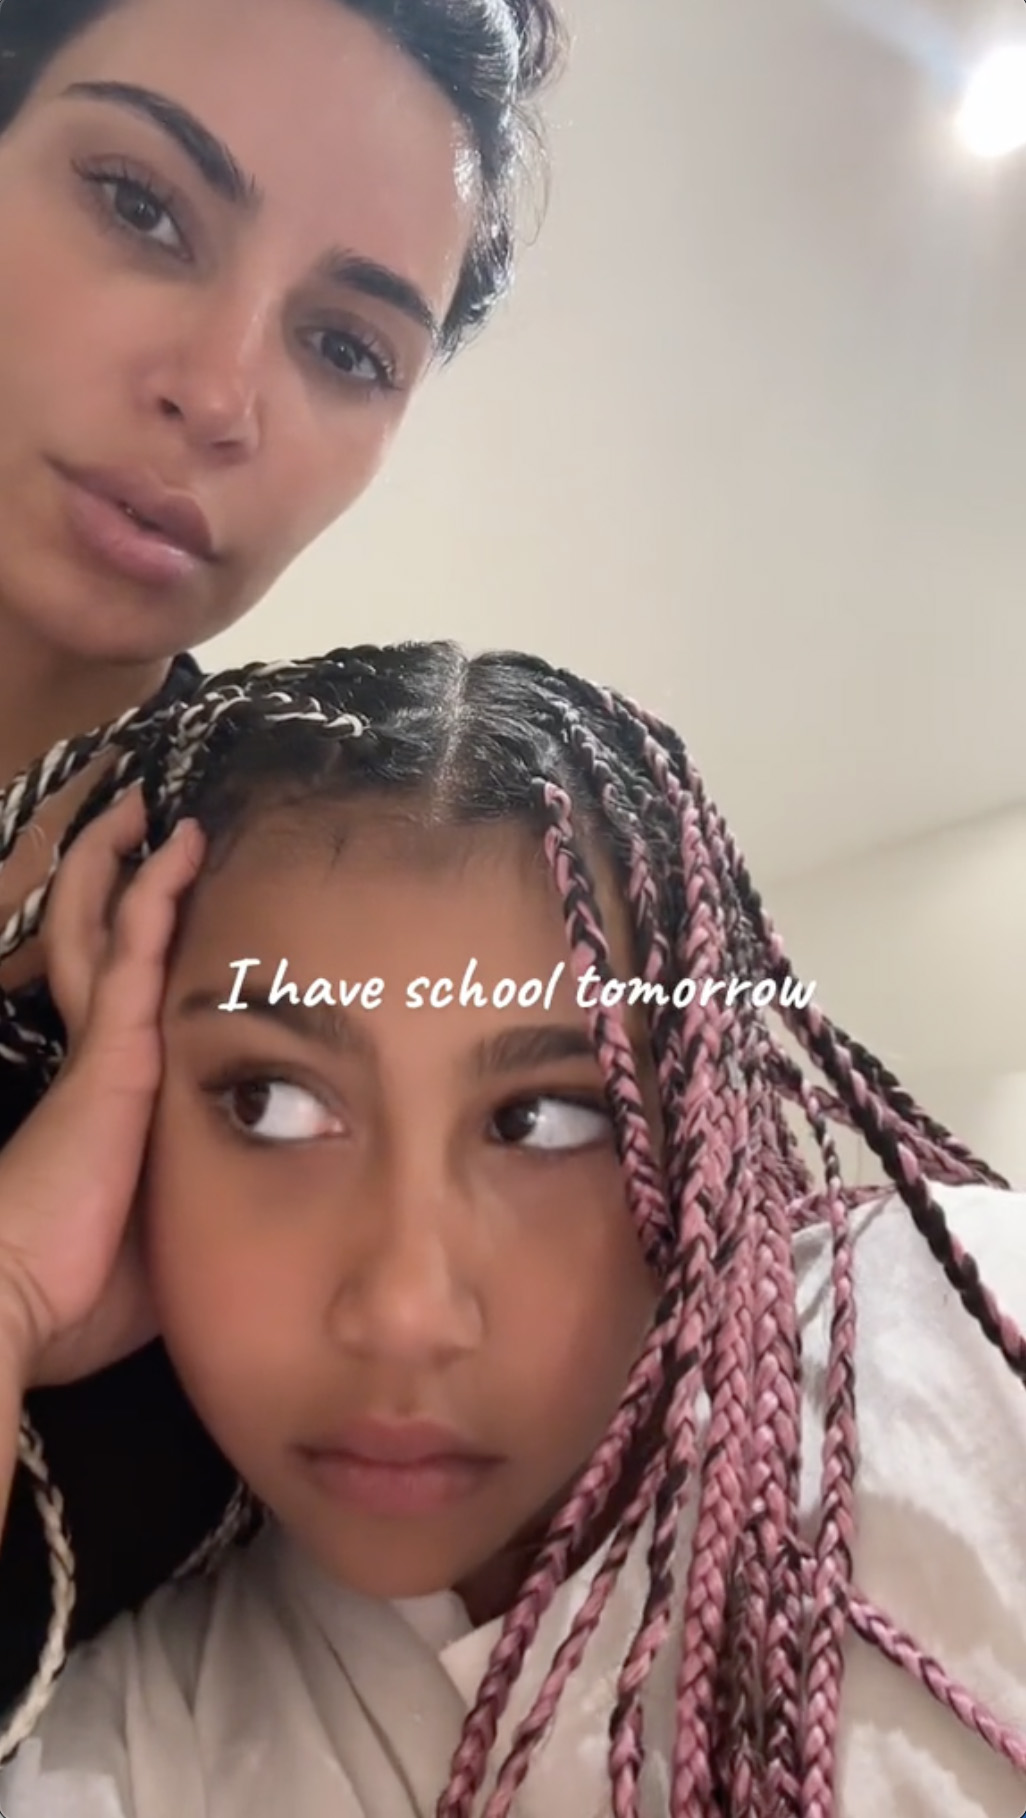 Kim Kardashian’s daughter North, 9, shows off chaotic dance moves with mom in new TikTok after ‘refusing to go school’